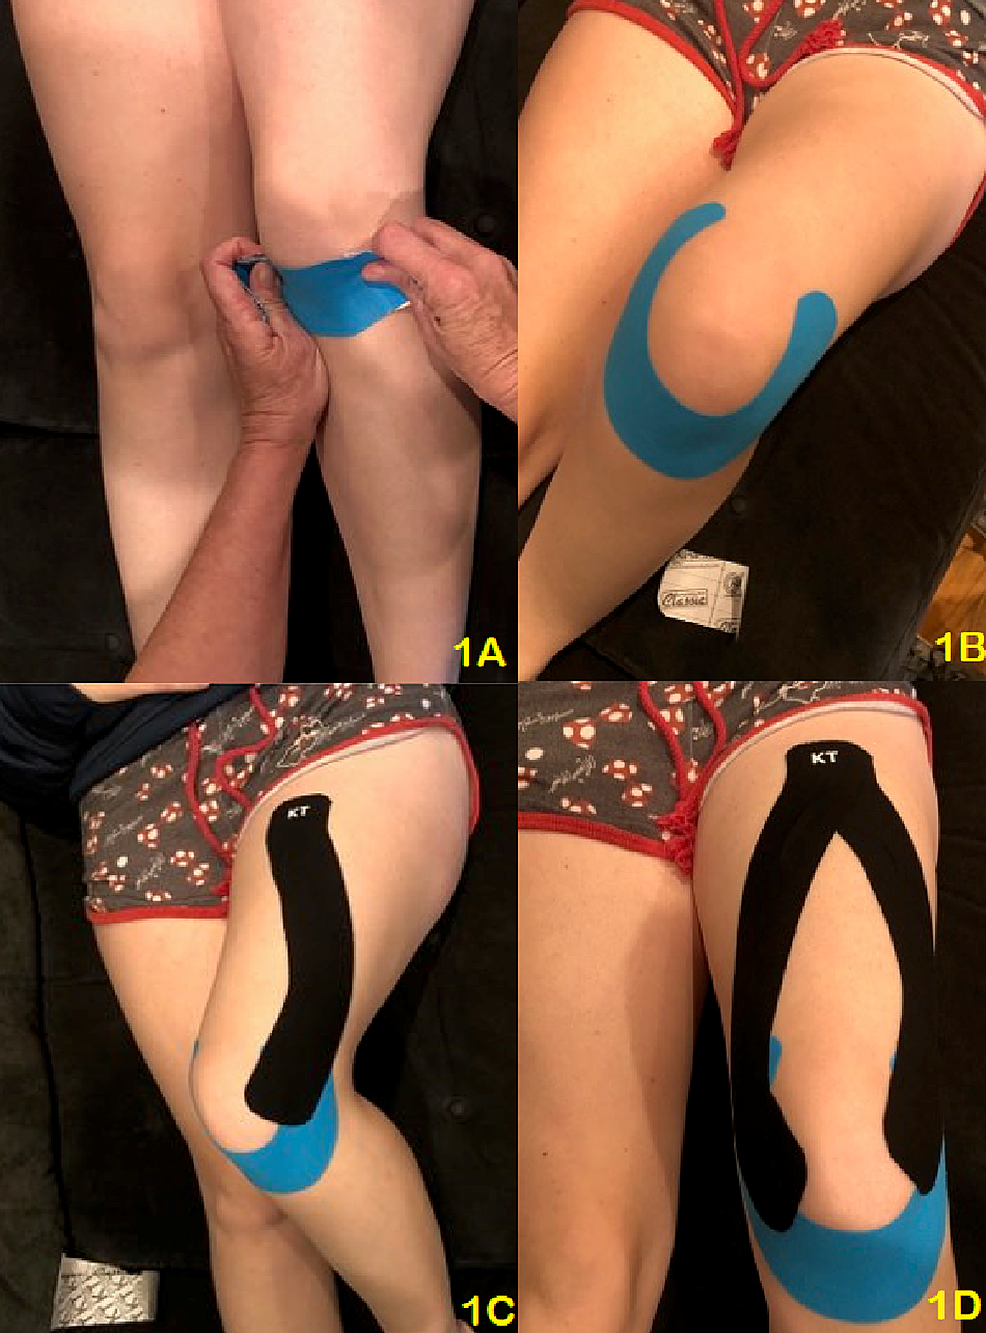 How to apply Kinesiology tape for knee pain - Patella Femoral Syndrome /  Osgood Schlatters Syndrome 